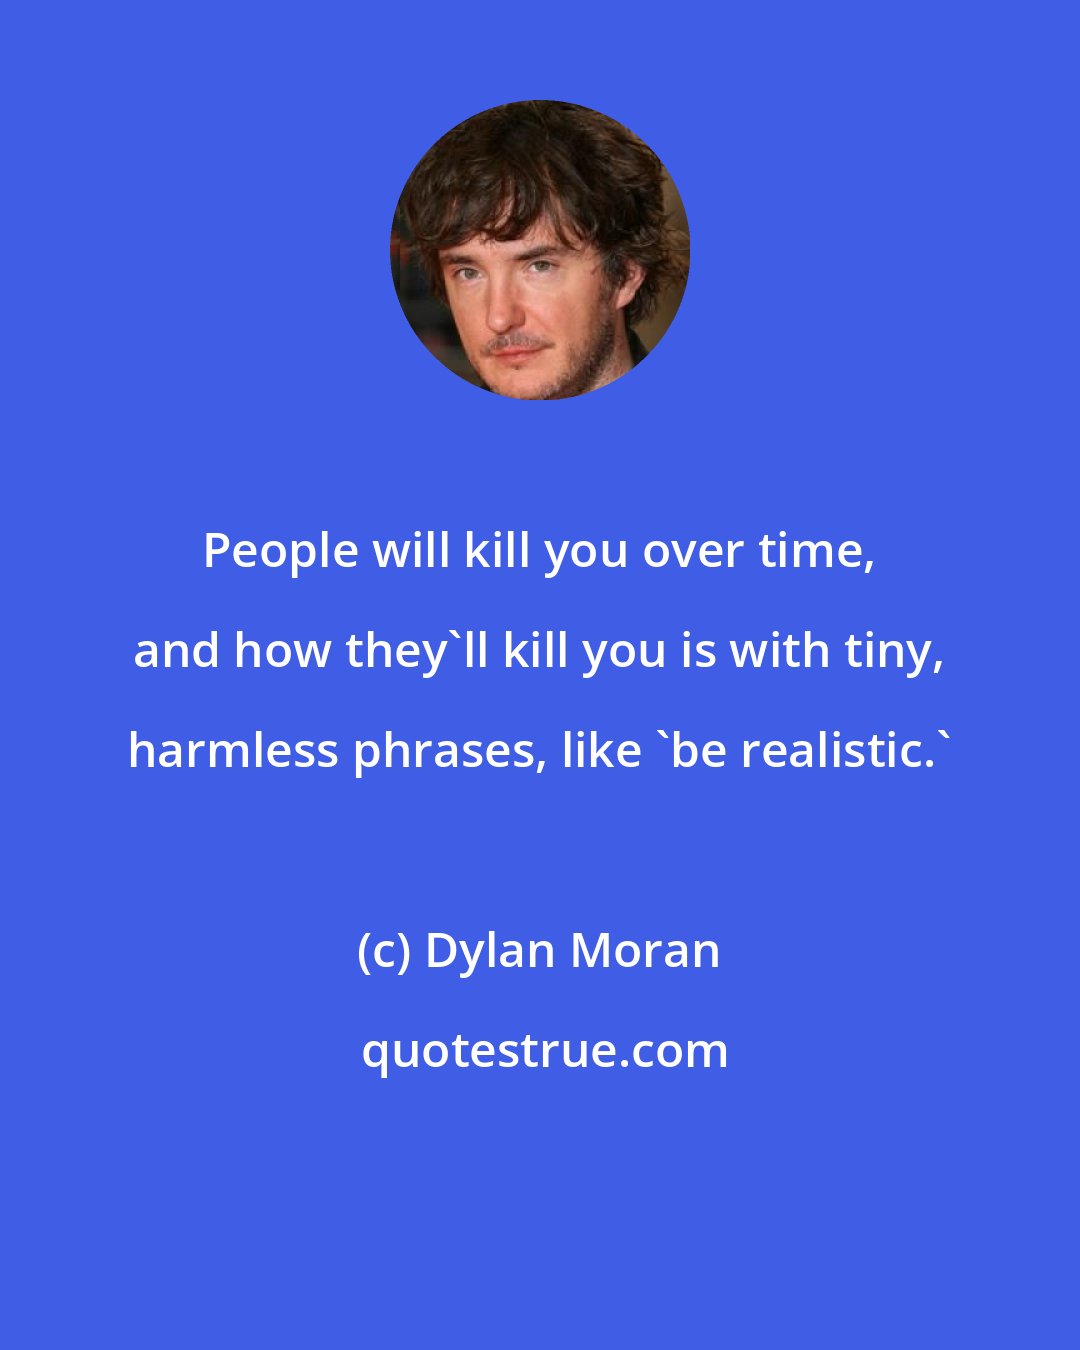 Dylan Moran: People will kill you over time, and how they'll kill you is with tiny, harmless phrases, like 'be realistic.'